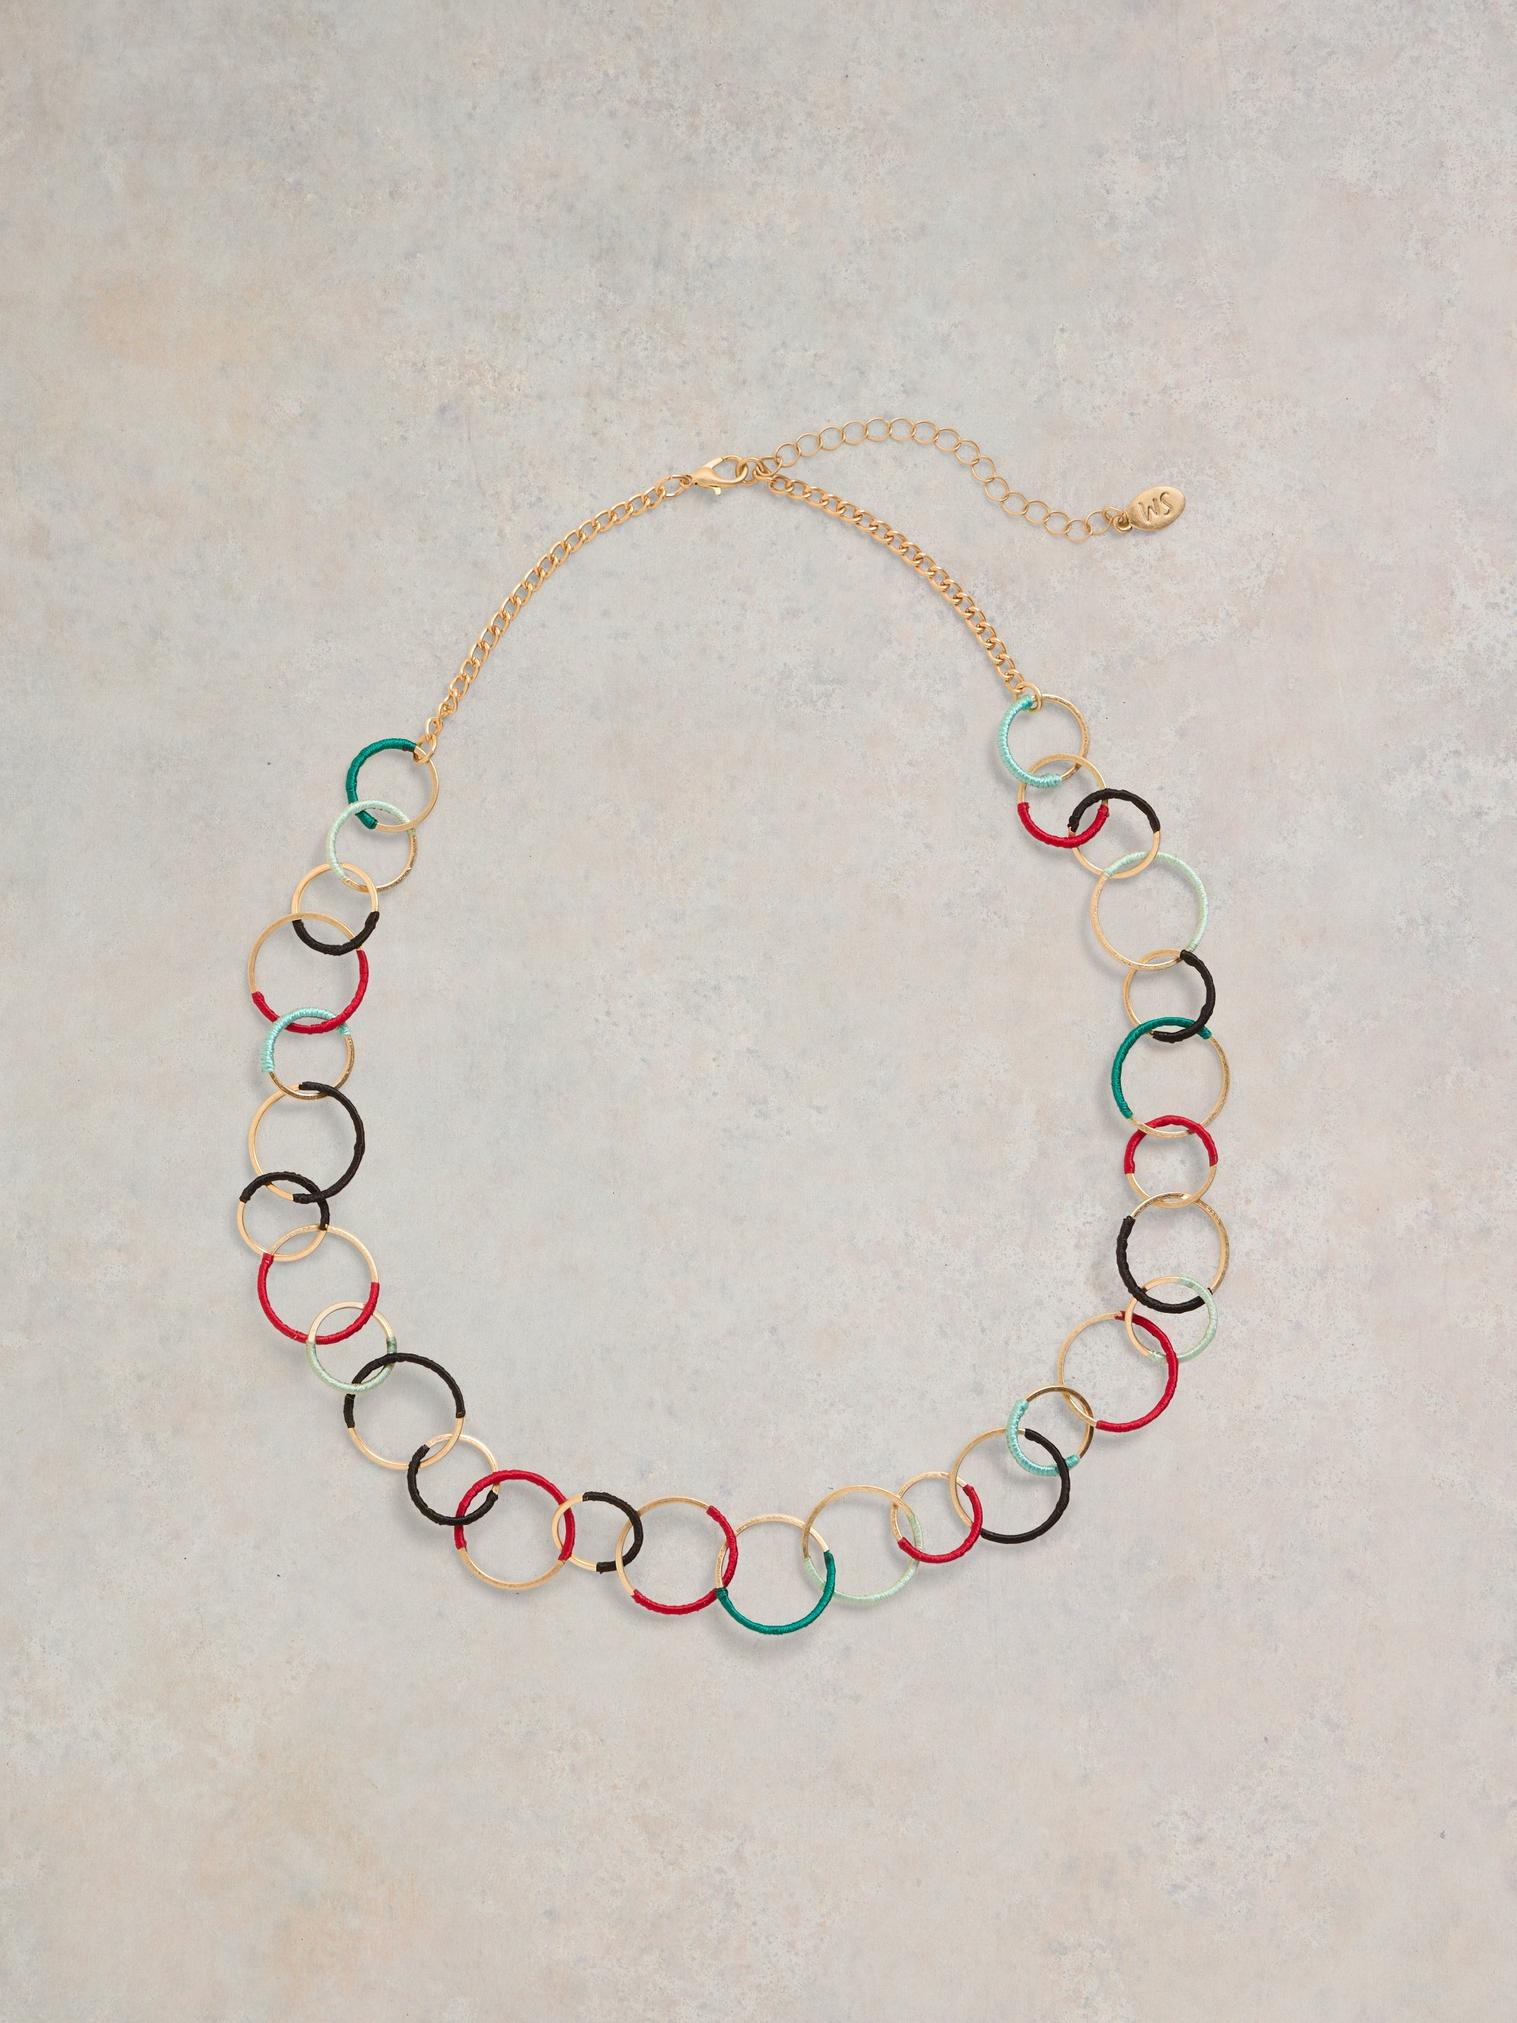 Wrapped Hoop Necklace in GLD TN MET - FLAT FRONT